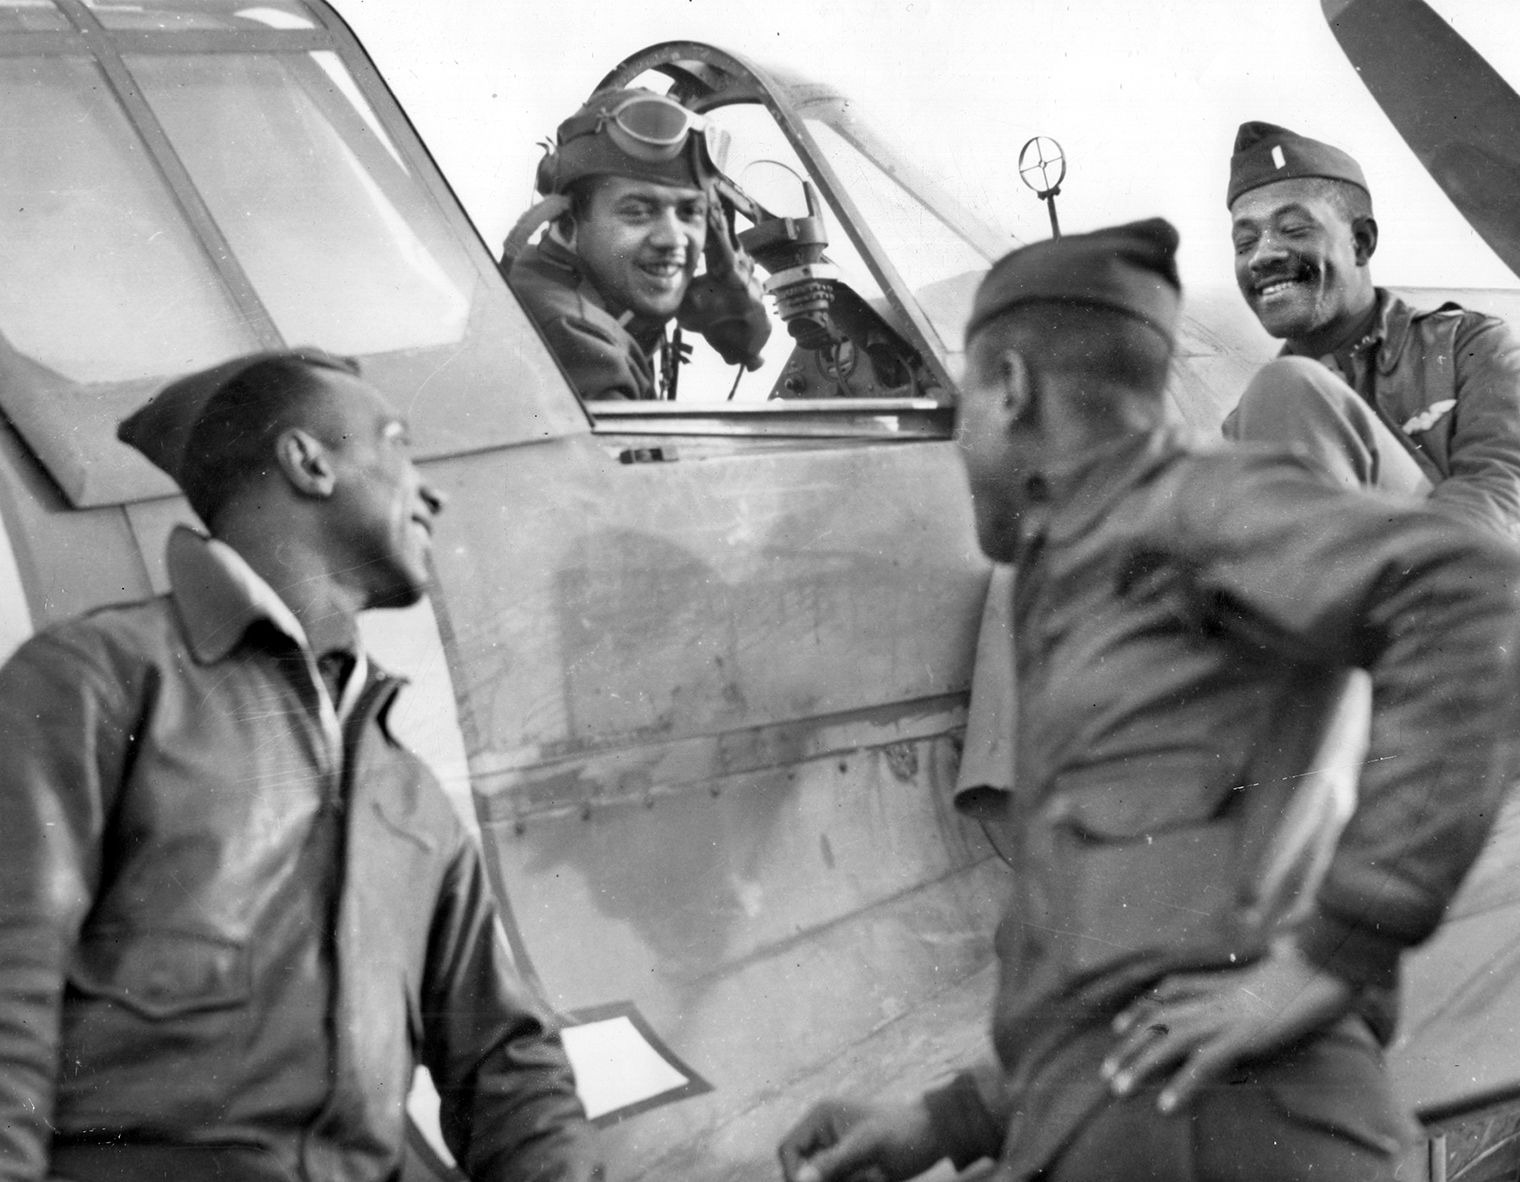 Though smiling for this photo, 99th Pursuit Squadron pilots Lieutenant W.V. Eagleson (in cockpit of his P-40) with Captain Lemuel R. Curtis, Lieutenant Charles B. Hall, and Lieutenant Willie Ashley and the rest of the Tuskegee Airmen were often frustsrated at being considered less capable then white pilots. 